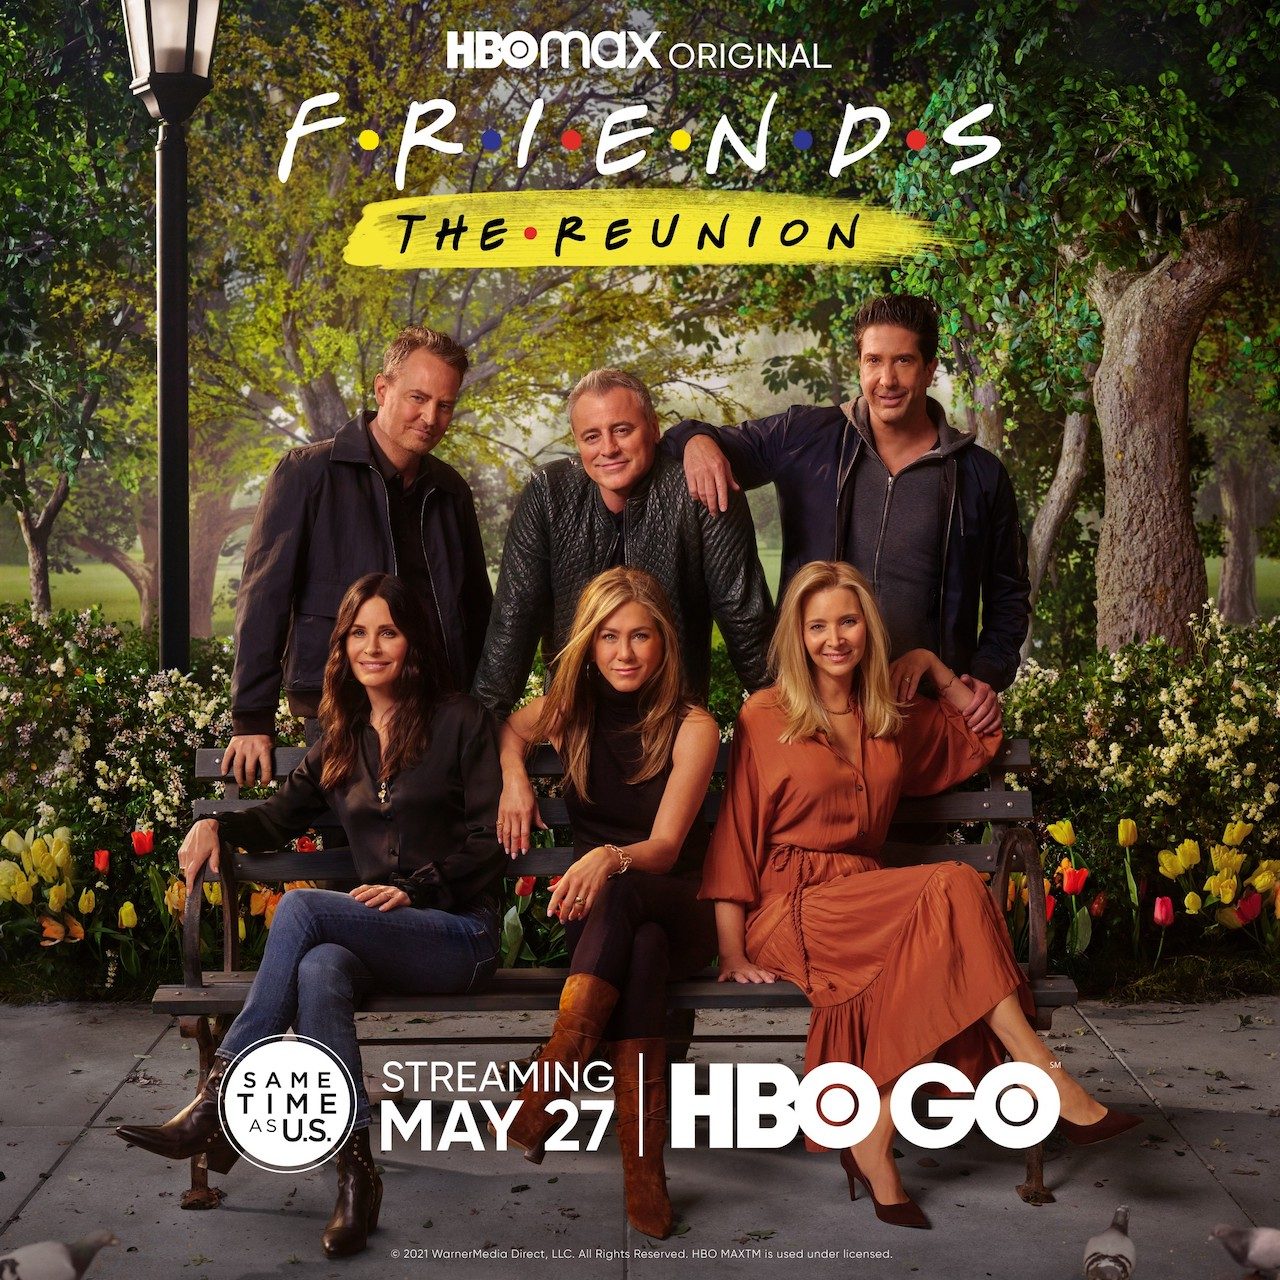 ‘Friends: The Reunion’ to premiere on HBO, HBO GO for Philippine viewers